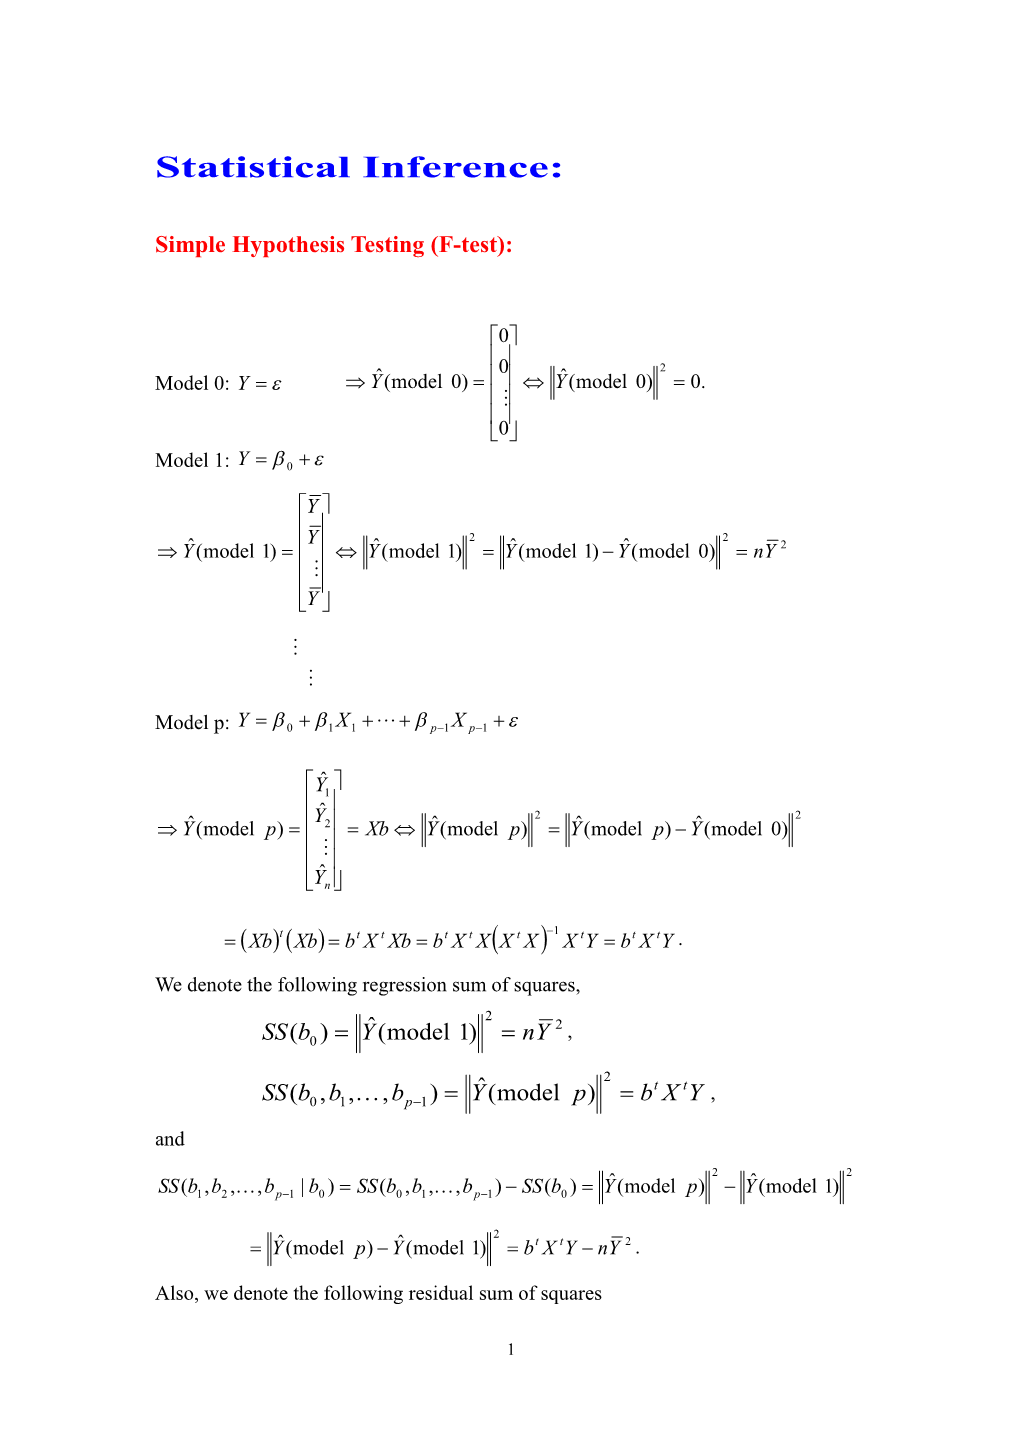 Simple Hypothesis Testing (F-Test)